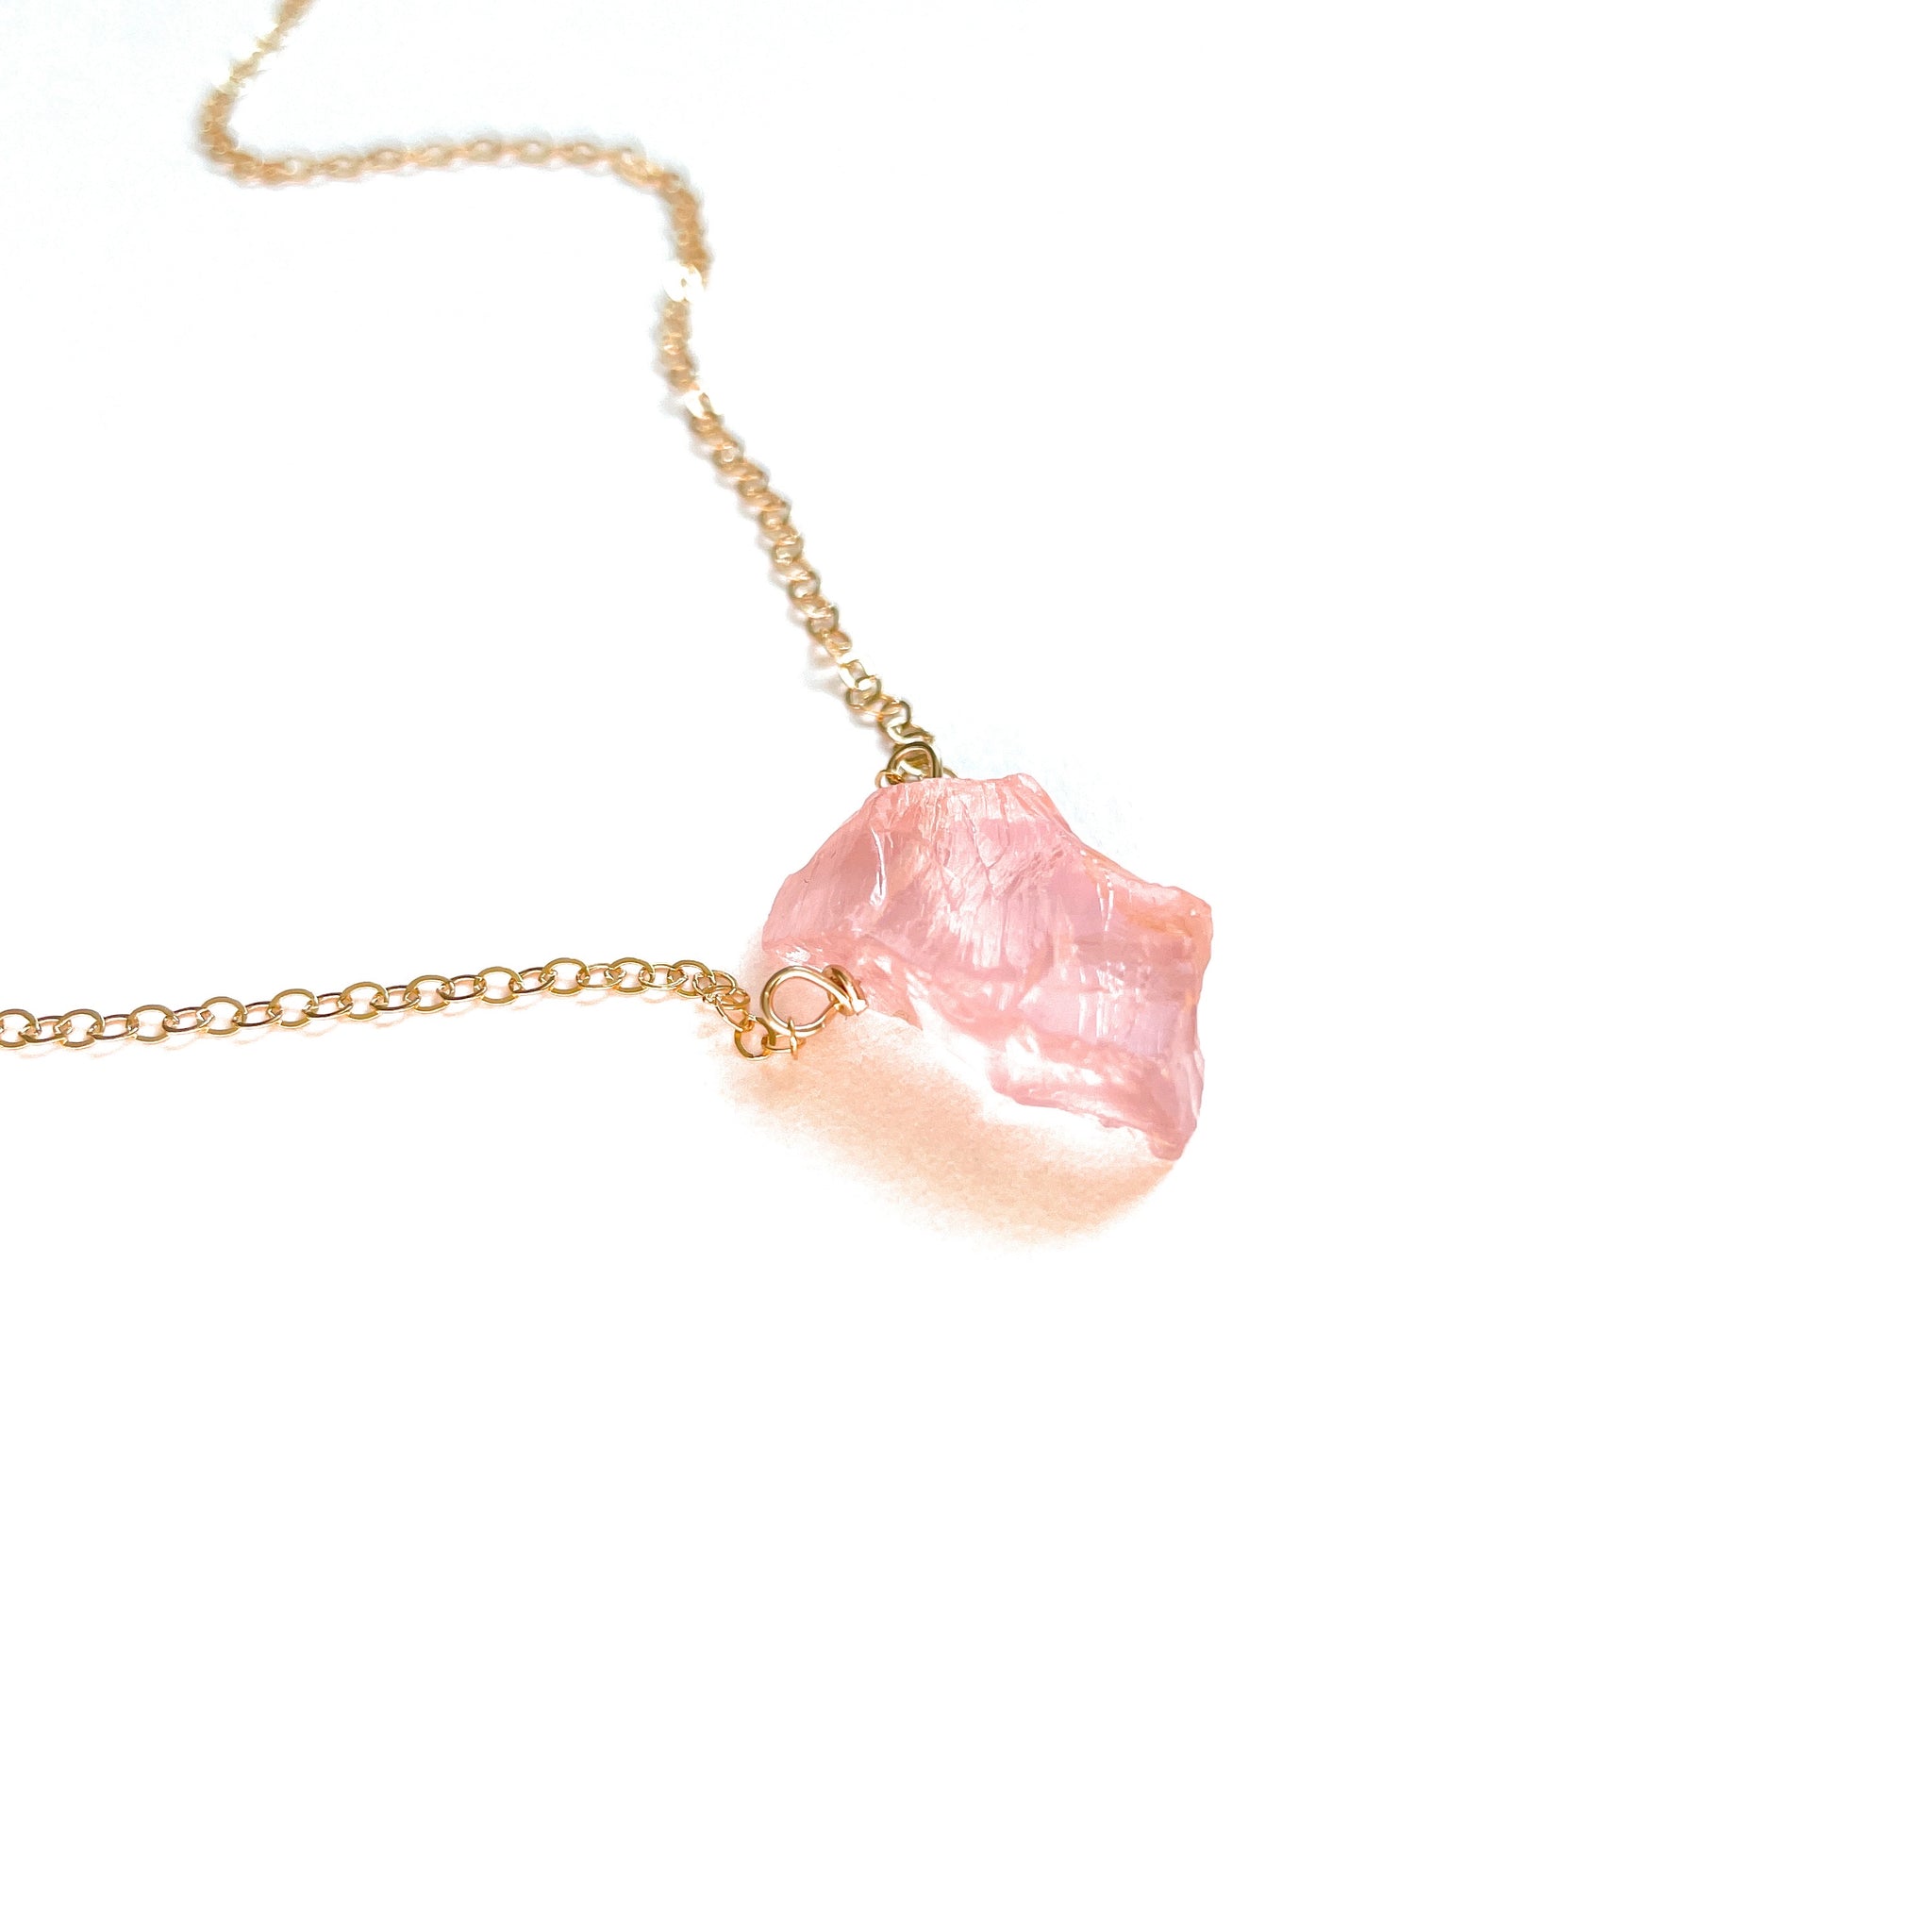 Raw Rose Quartz Crystal Healing Necklace Silver or Gold Filled ...